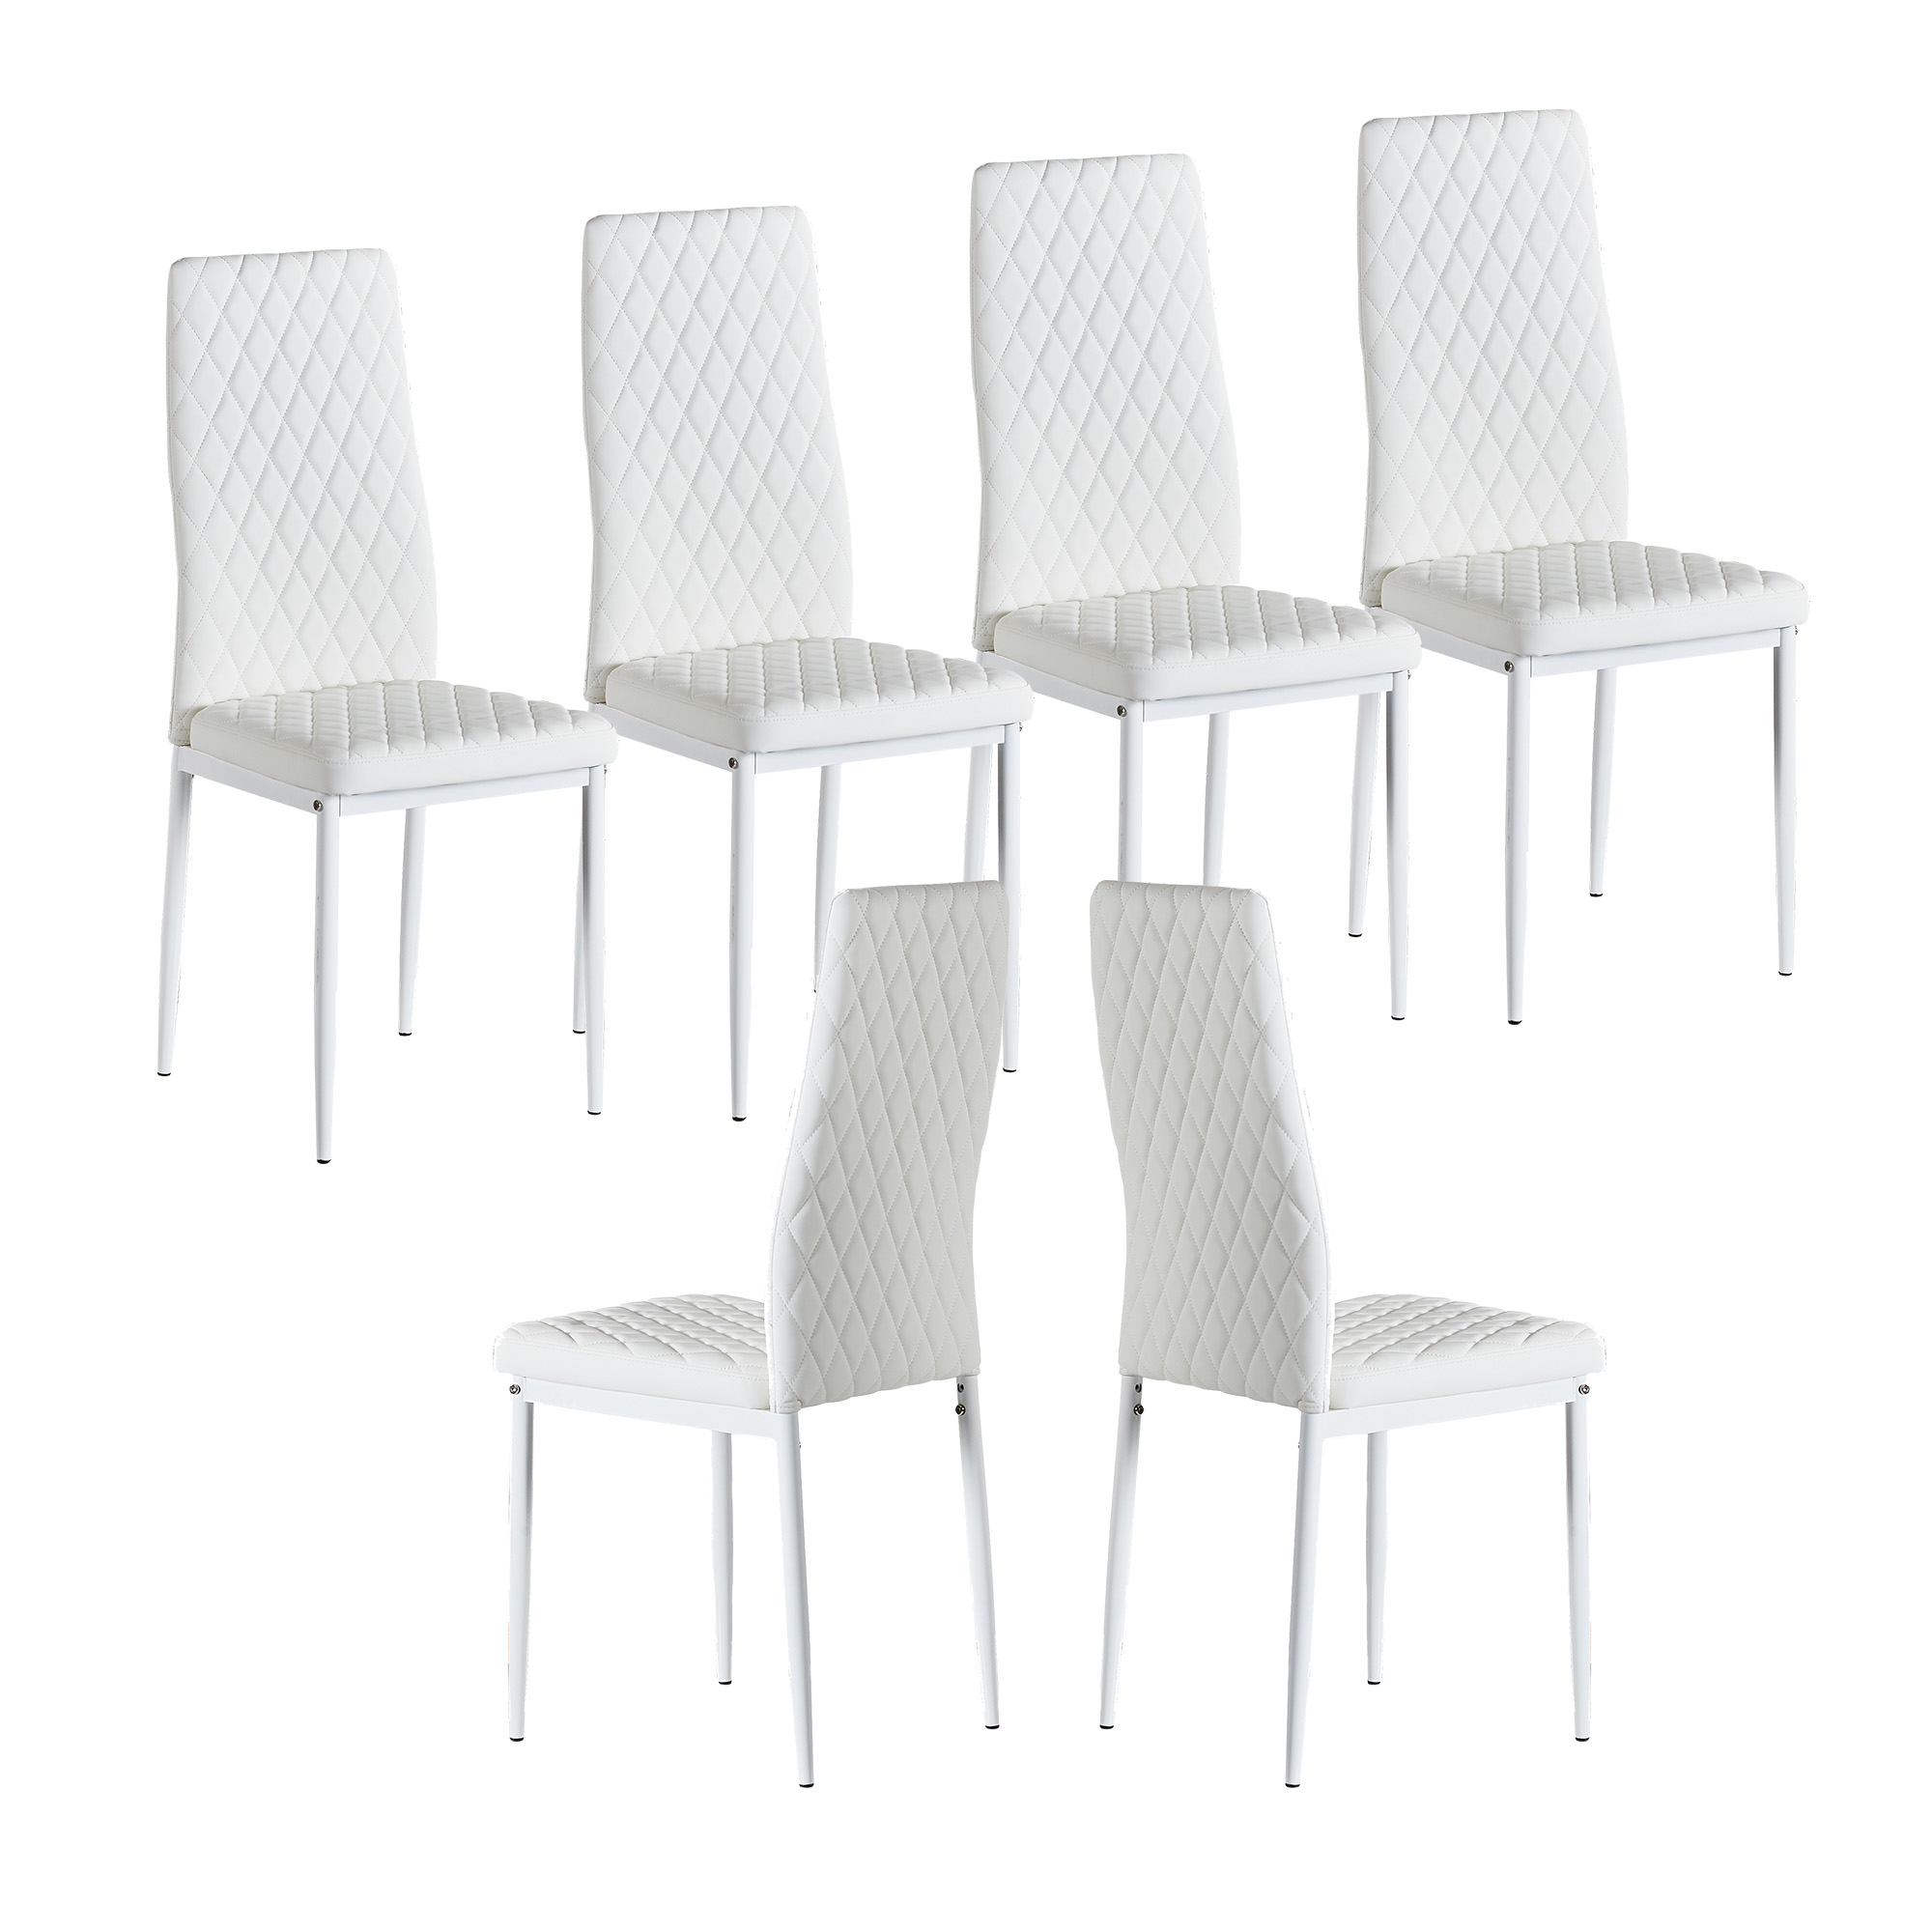 White modern minimalist dining chair fireproof leather sprayed metal pipe diamond grid pattern restaurant home conference chair set of 6-CASAINC